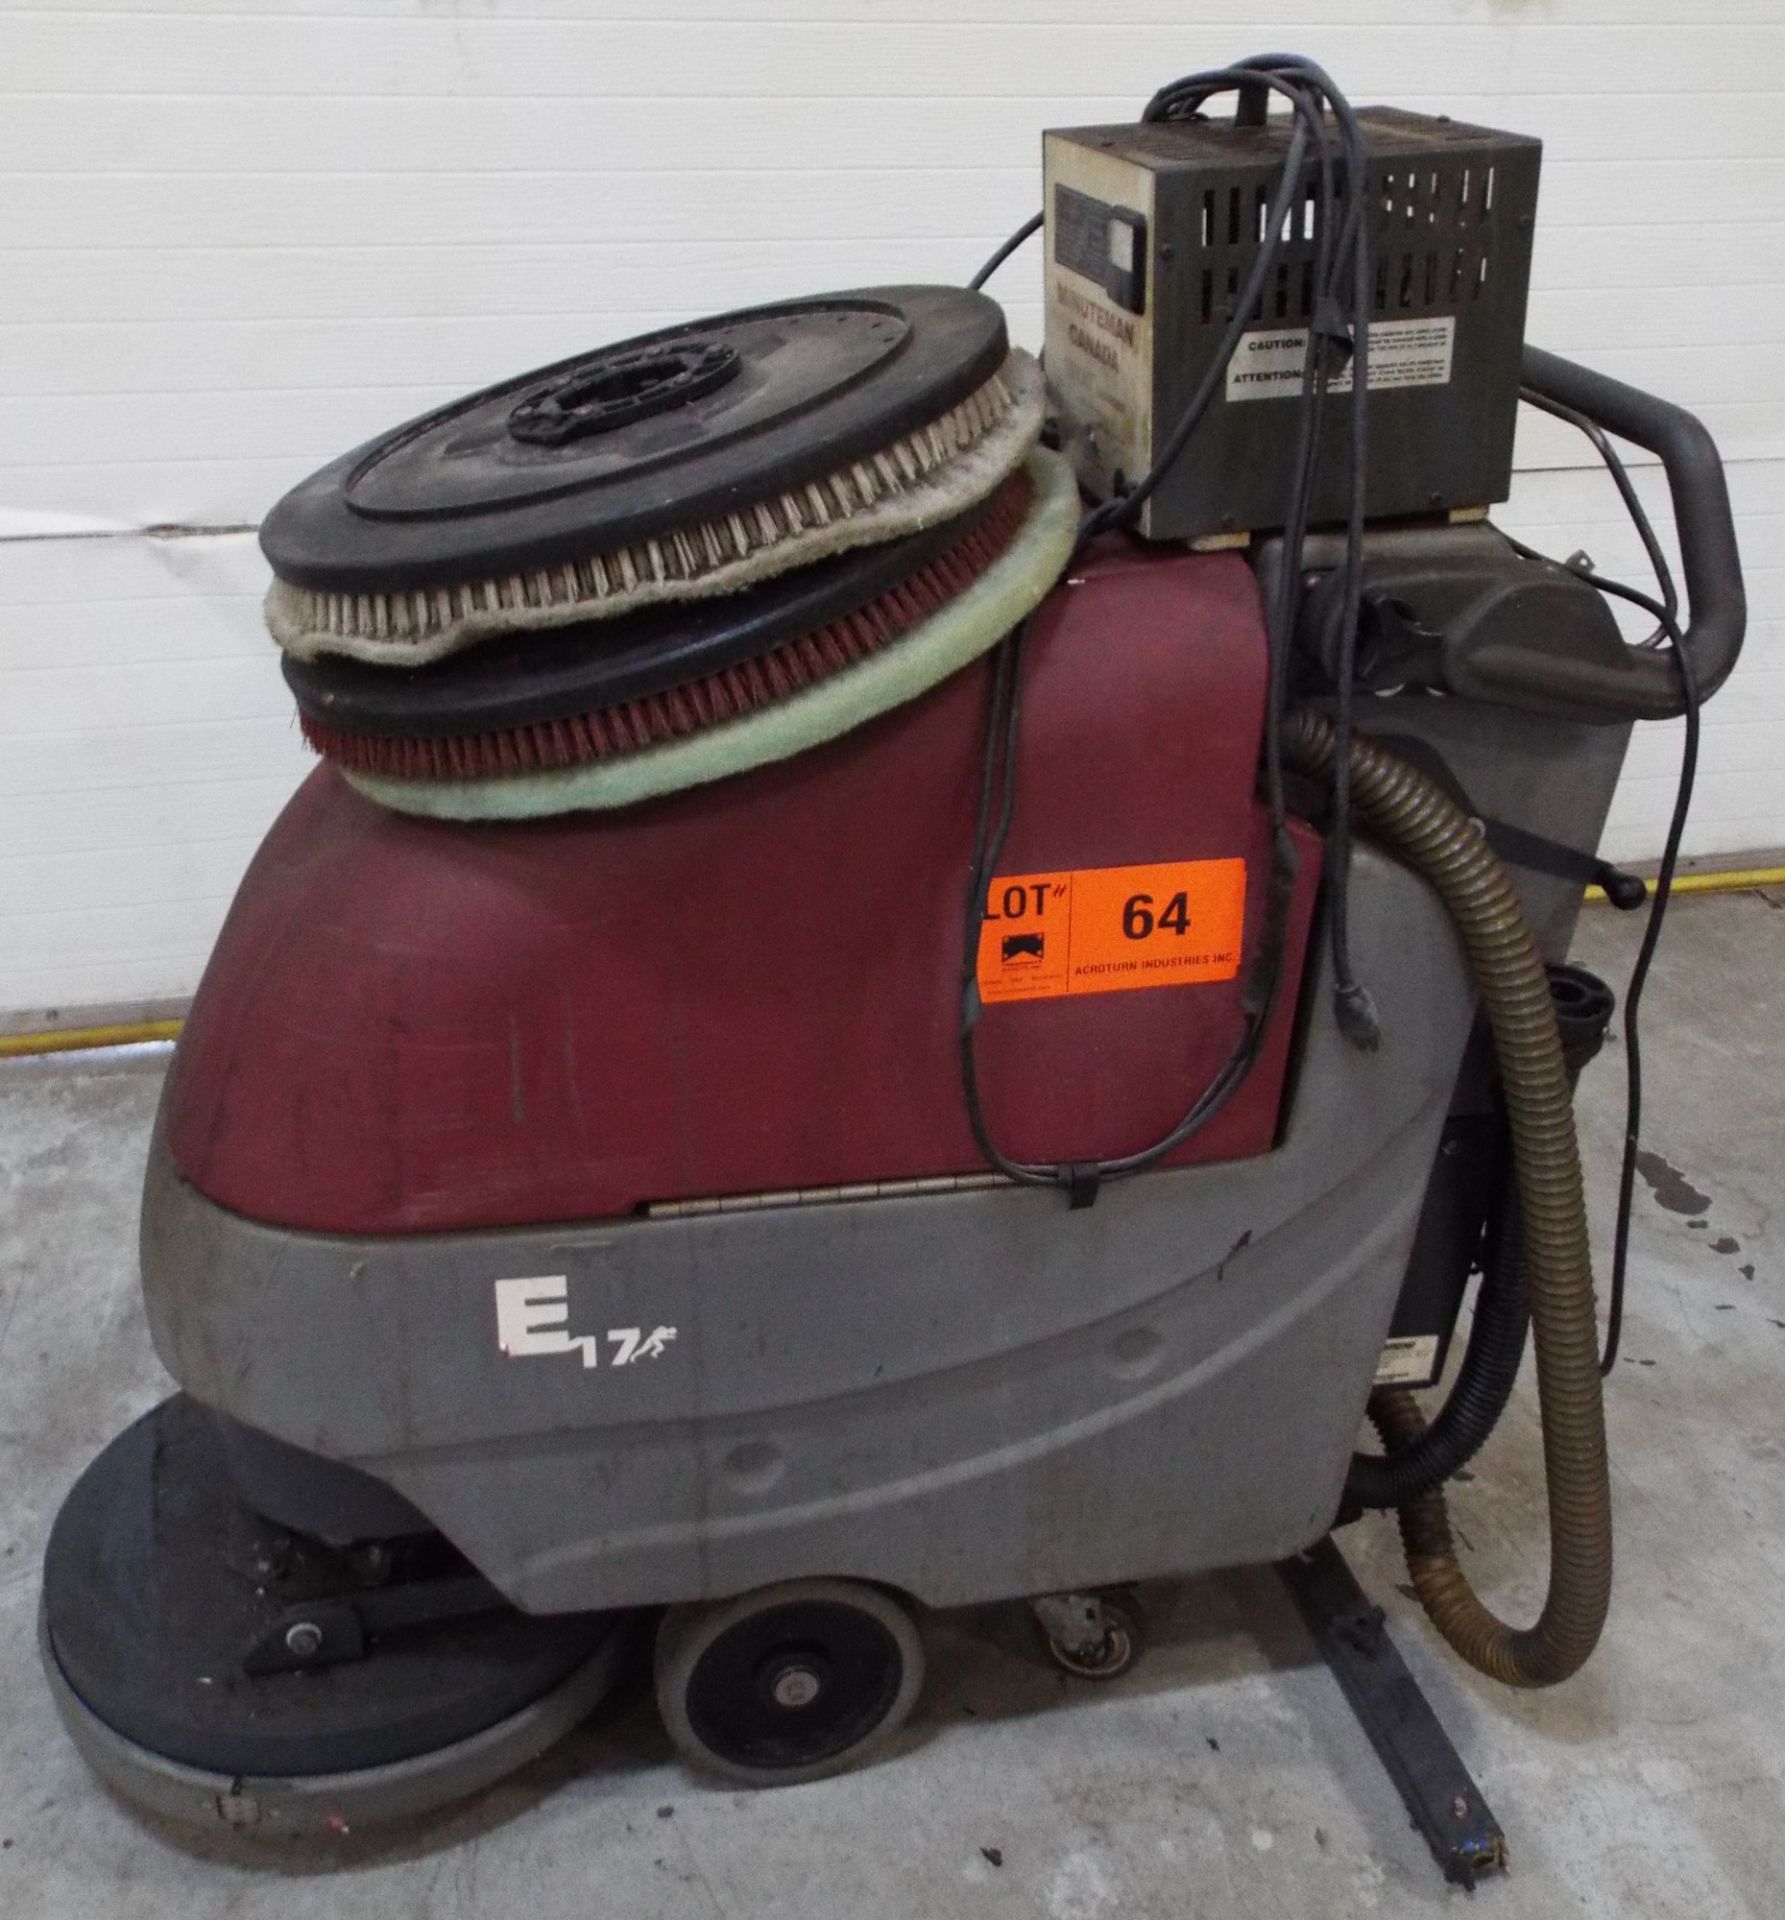 LOT/ MINUTEMAN E17 & 200 FLOOR SCRUBBERS WITH CHARGER & ACCESSORIES (NOT IN SERVICE)